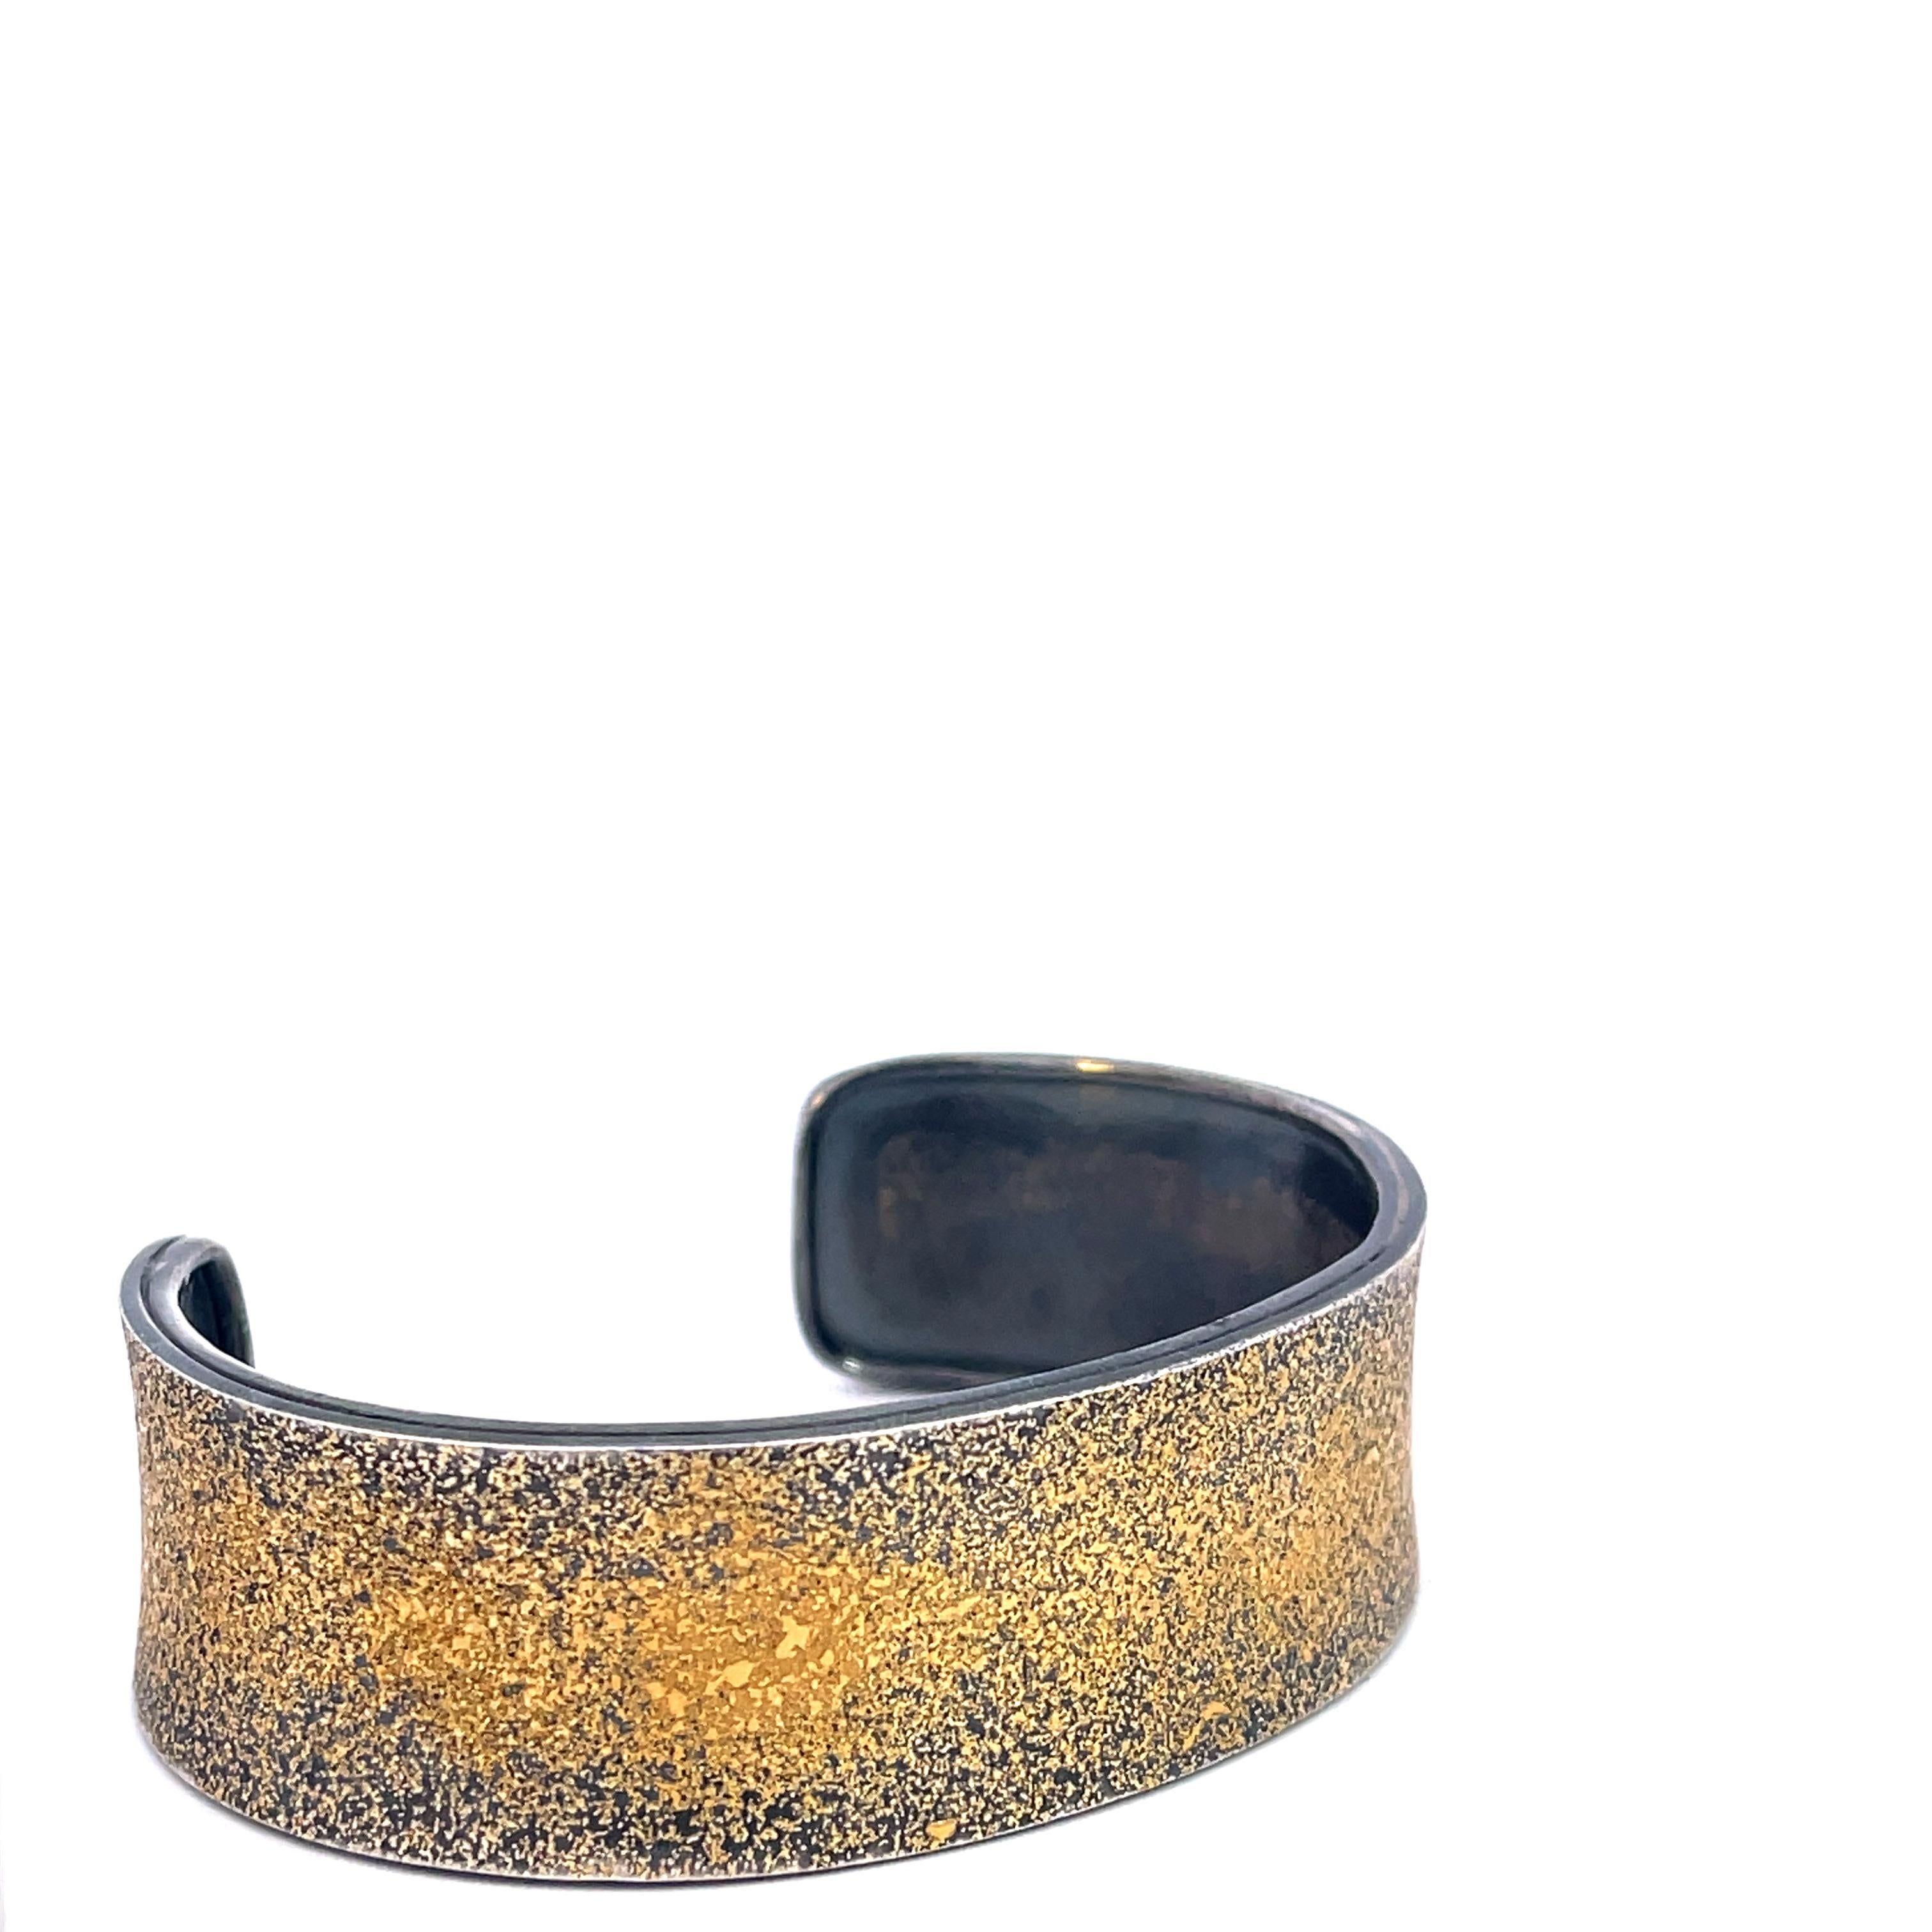 An oxidized sterling silver straight narrow cuff bracelet with 24k gold fairy dust. This cuff was made and designed by llyn strong.